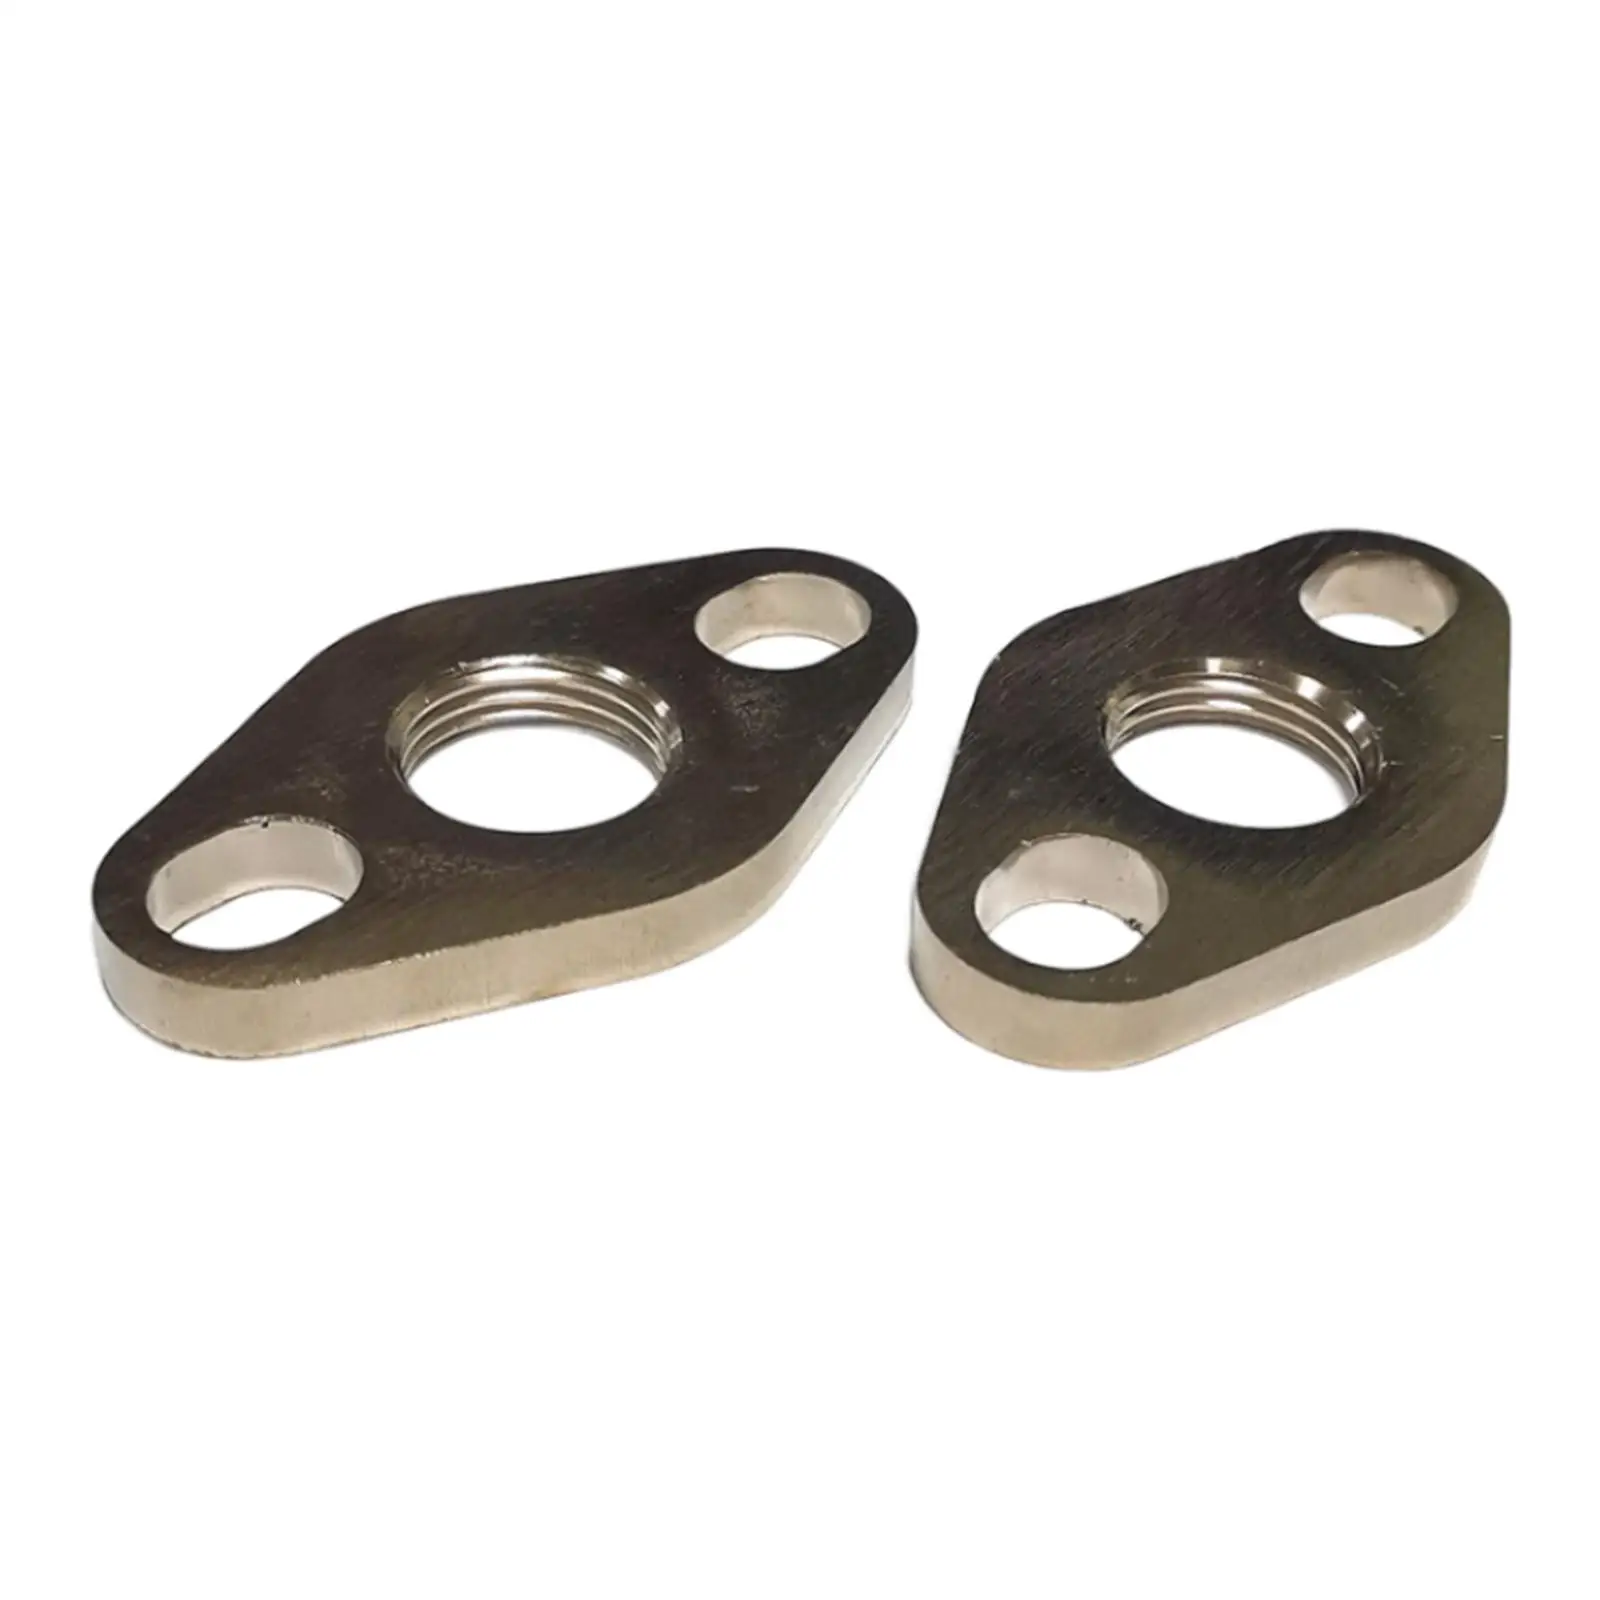 Flange Gasket Premium Universal Spare Parts Replaces for Toyota for tacoma